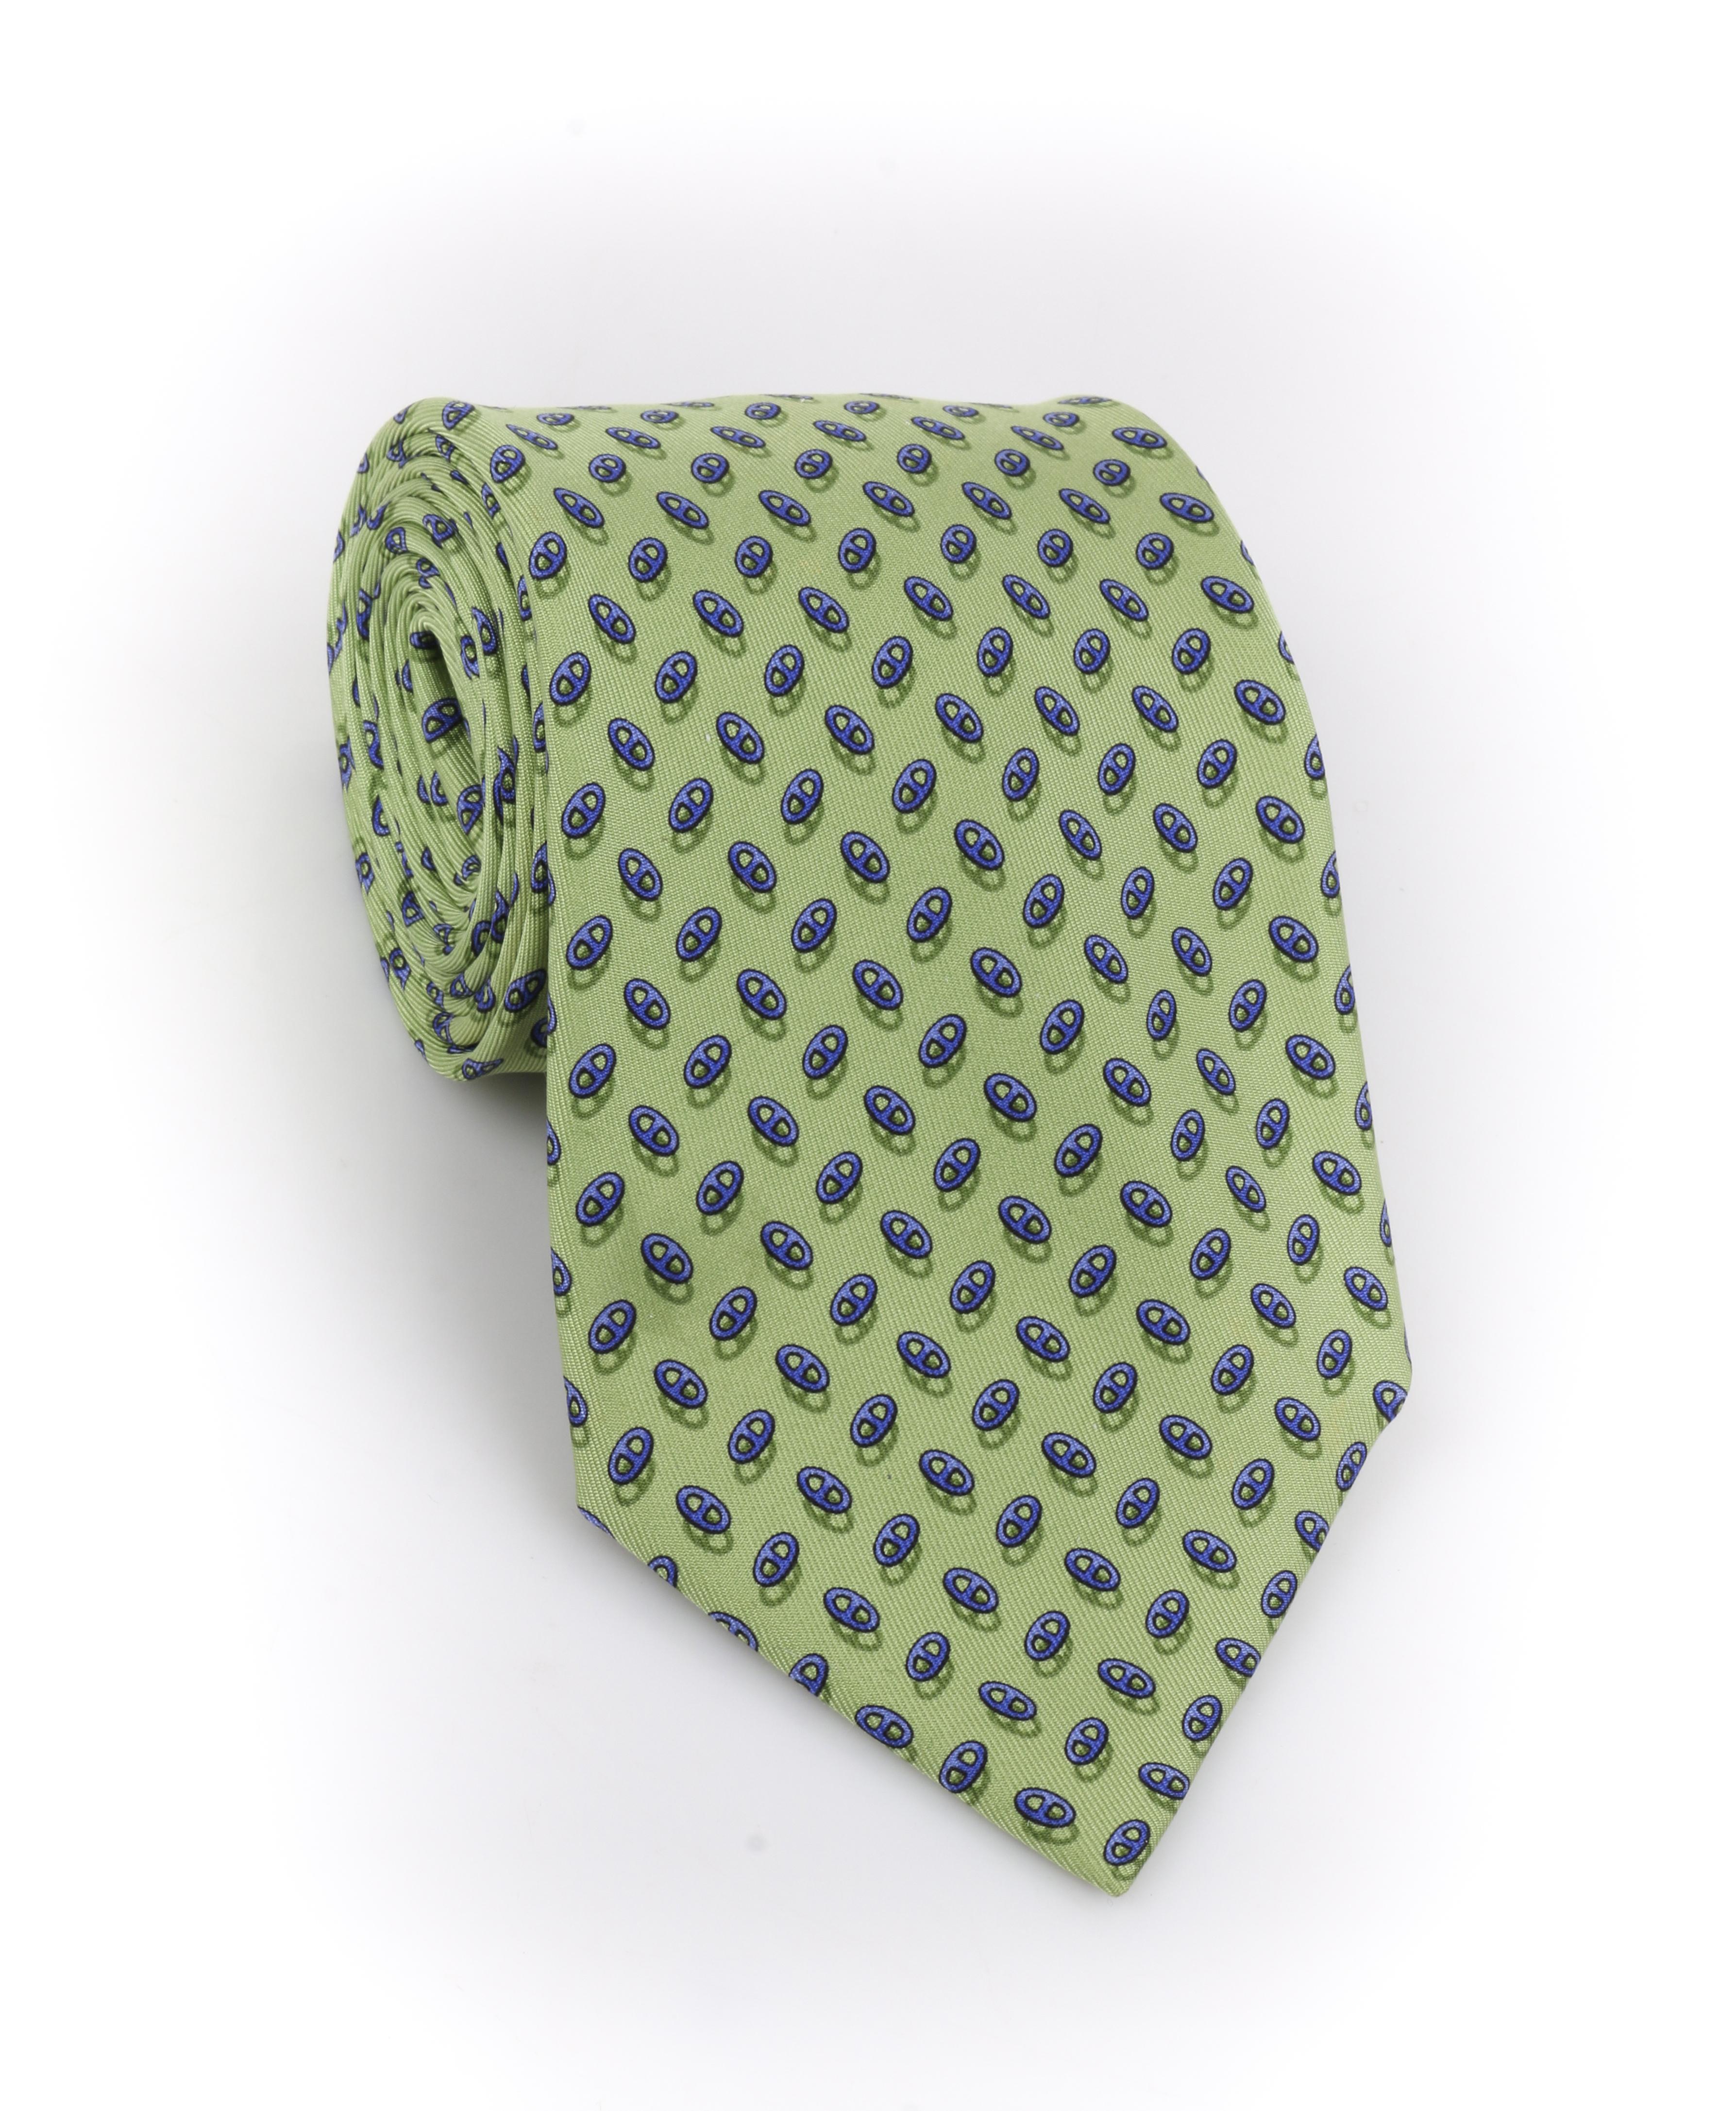 HERMES Green Blue Chaine D'ancre Pattern 5 Fold Silk Necktie Tie 7957 EA
 
Brand / Manufacturer: Hermes
Style: 5 fold necktie 
Color(s): Shades of green & blue
Lined: Yes
Marked Fabric Content: 100% Silk
Additional Details / Inclusions: All over